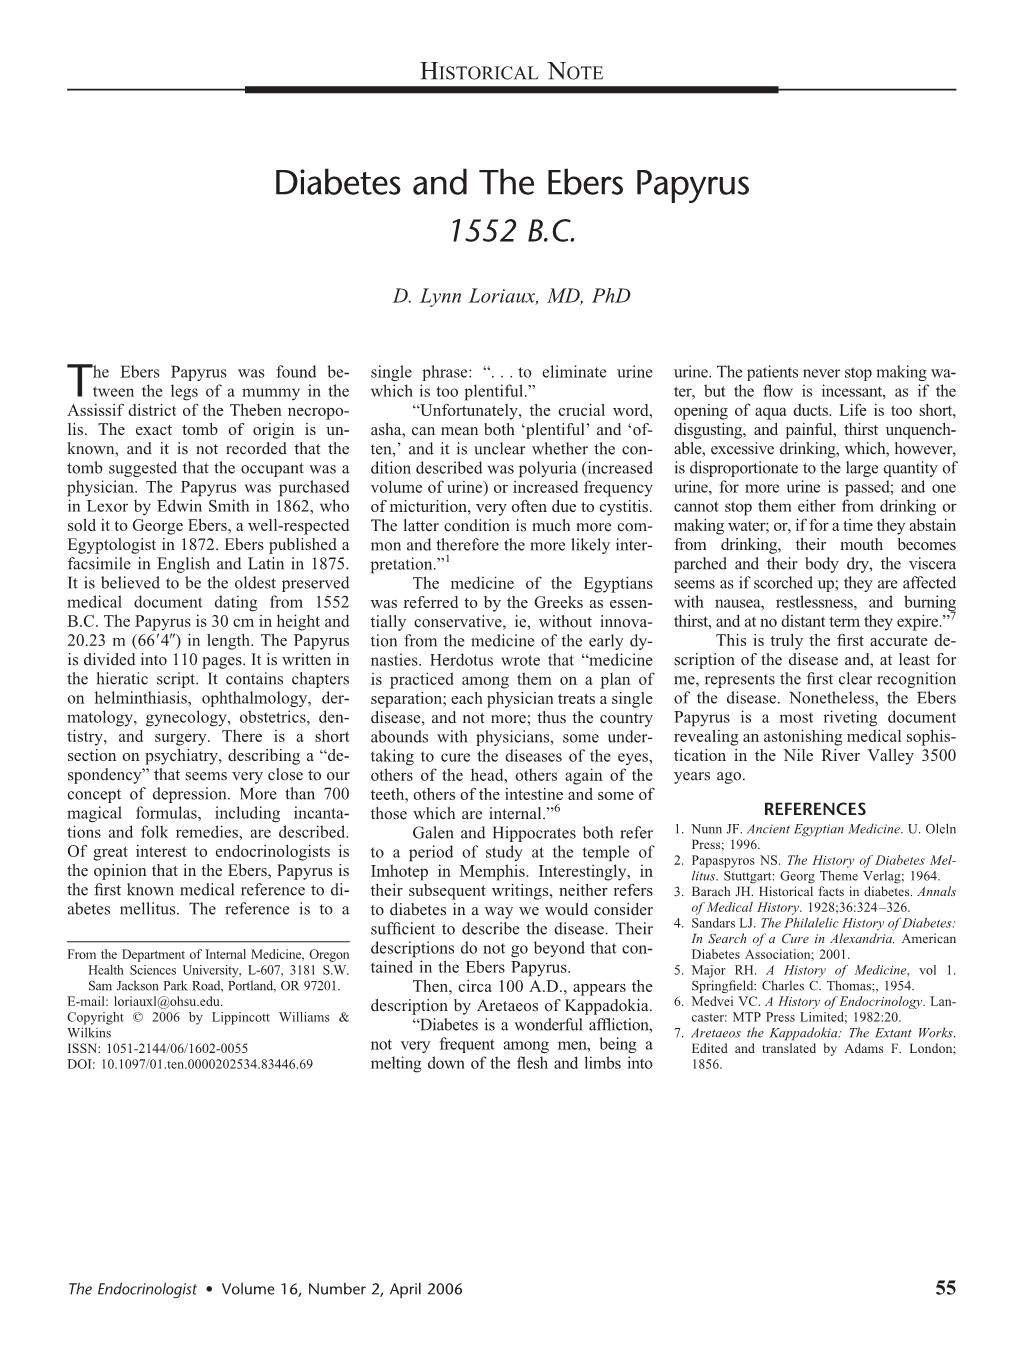 Diabetes and the Ebers Papyrus 1552 B.C